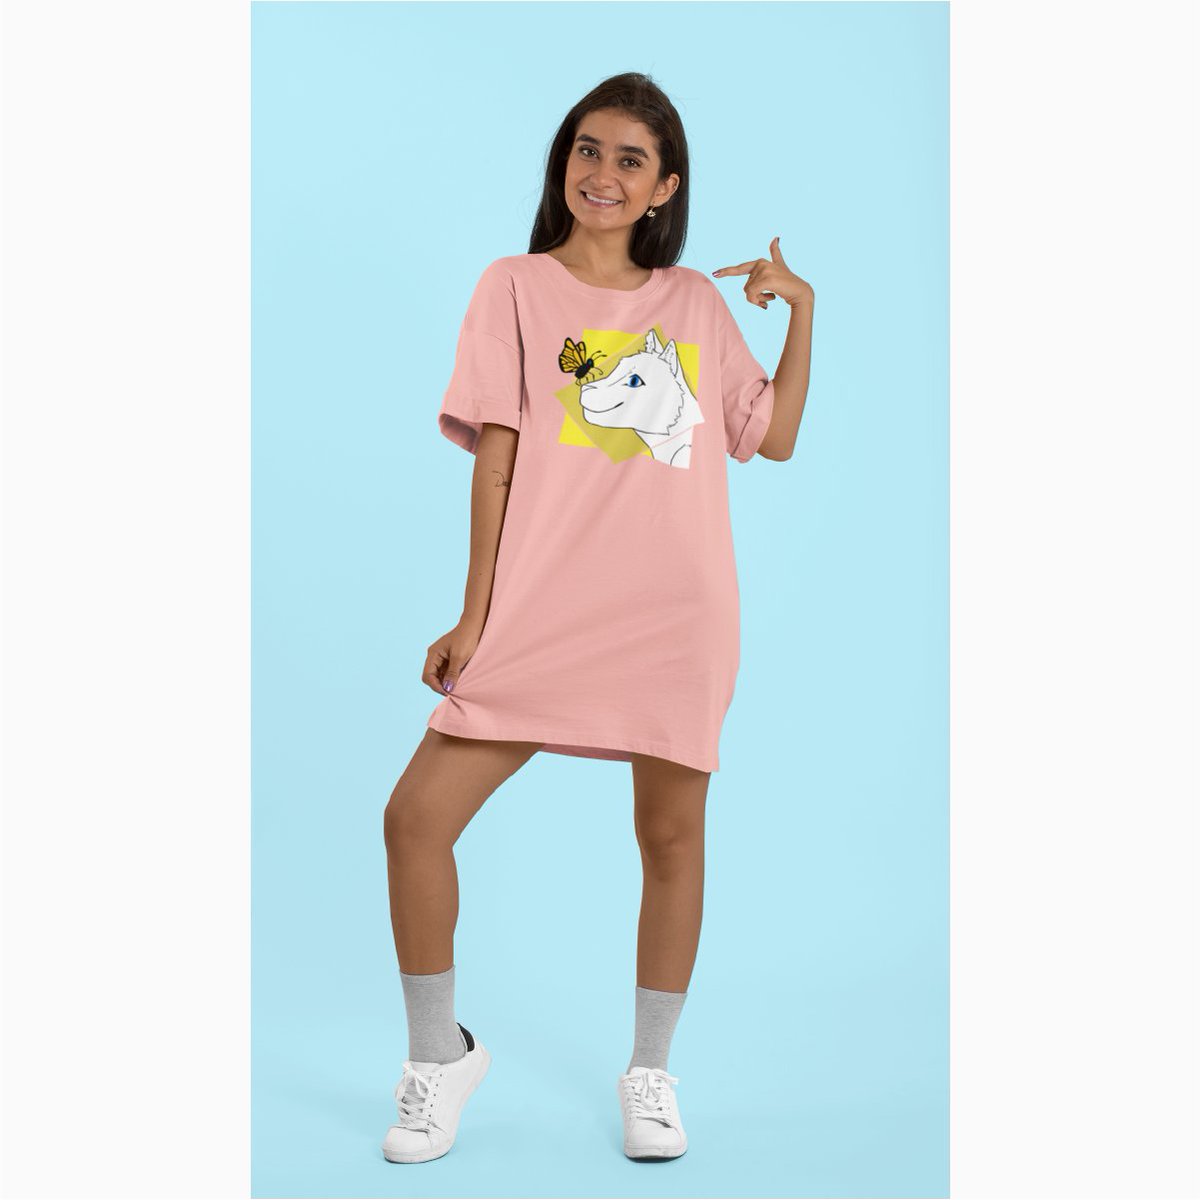 Style it with leggings, a belt, a denim jacket, or wear it alone, it'll look great anyway💃⁠ ⁠ Check the details to buy in the link below l8r.it/LQeU ⁠ #funnycattshirts #tshirtdress #cutecatclub #kawaiifashion